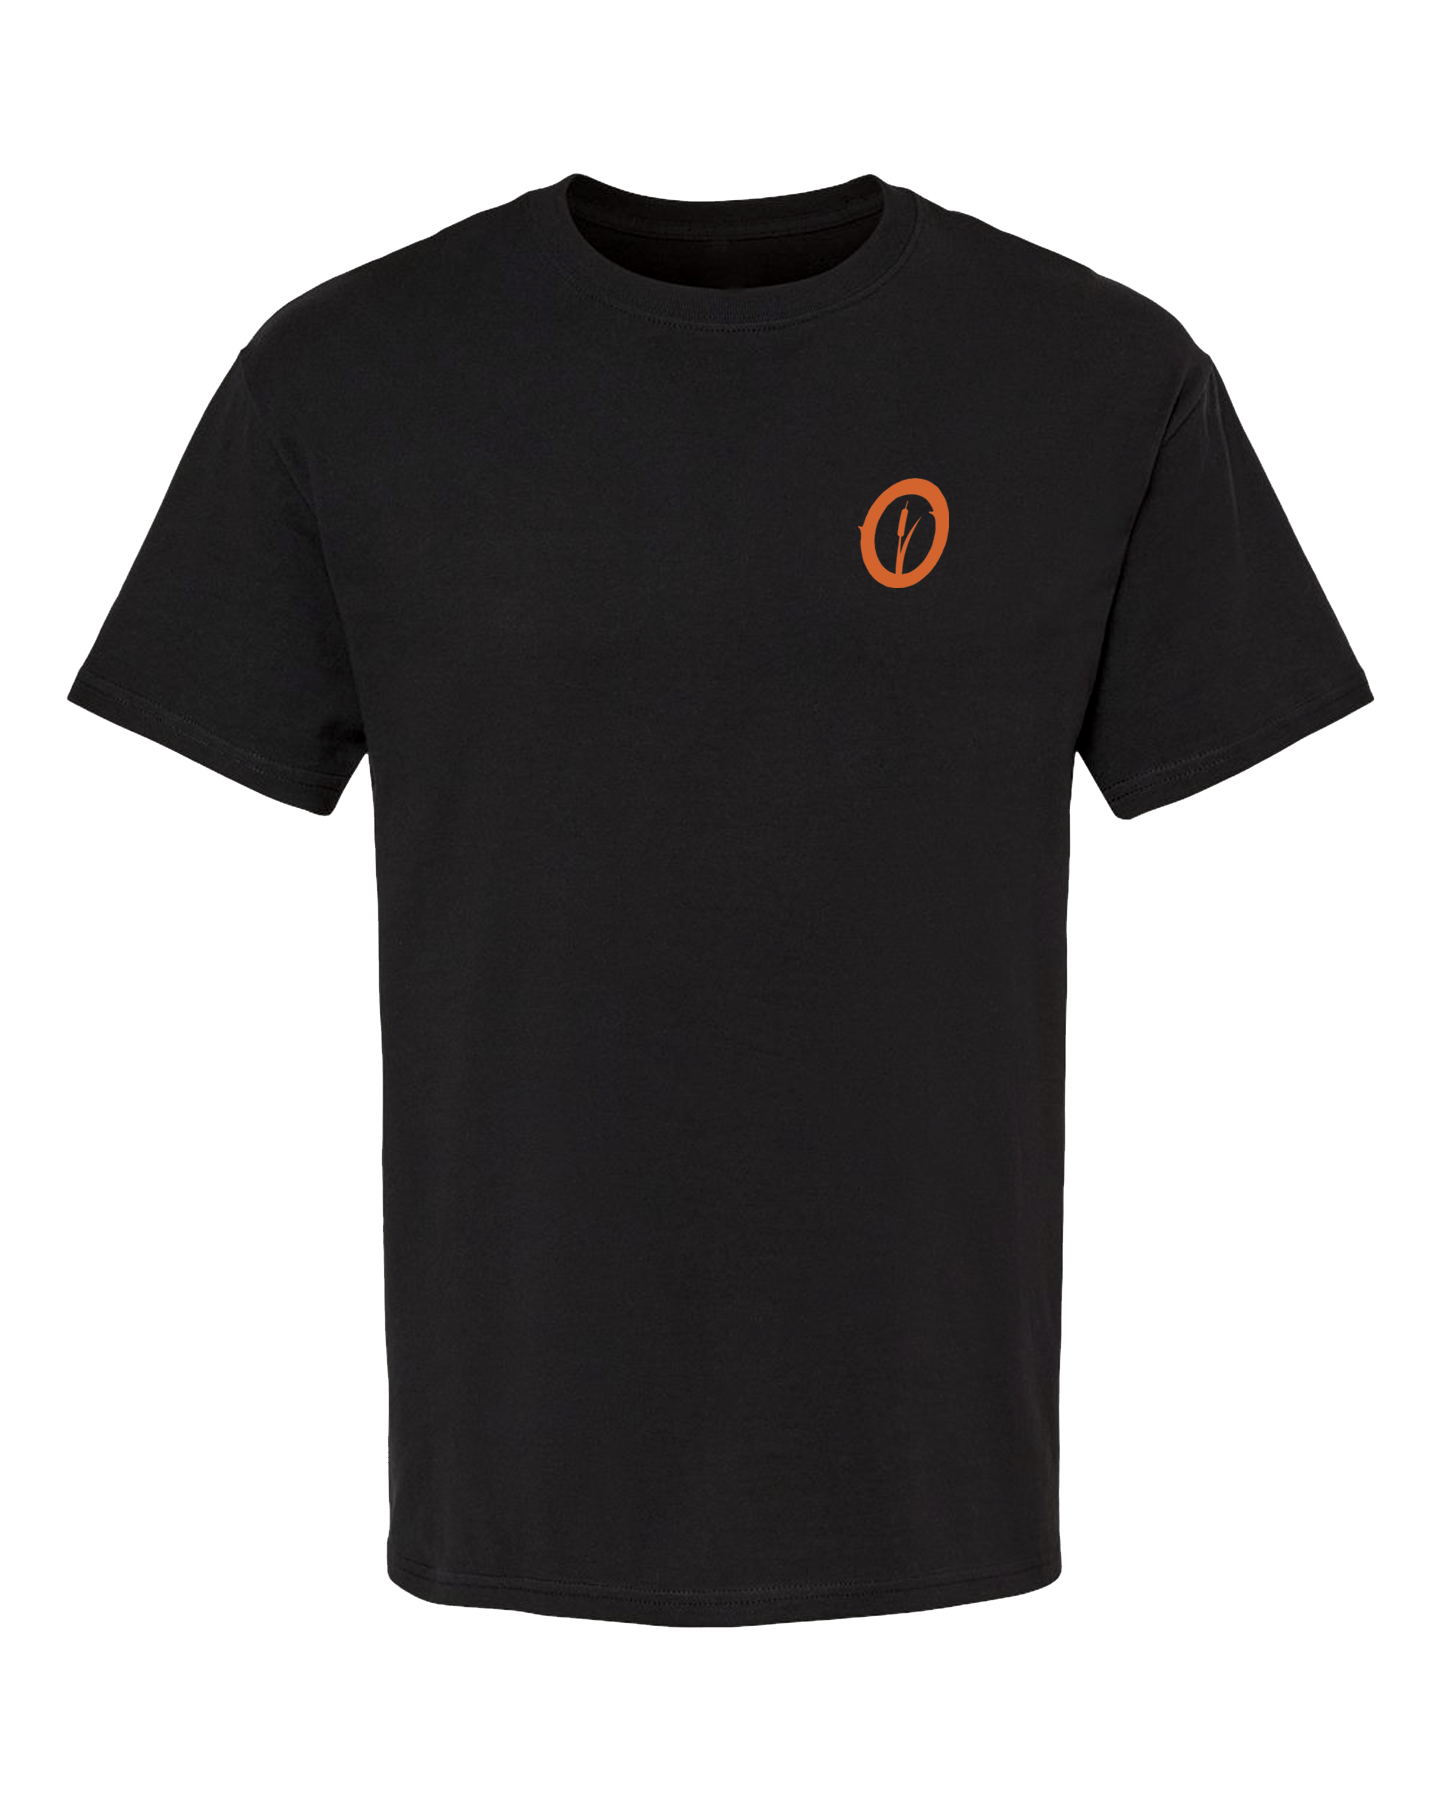 Owen Riegling Sunset Tee Front